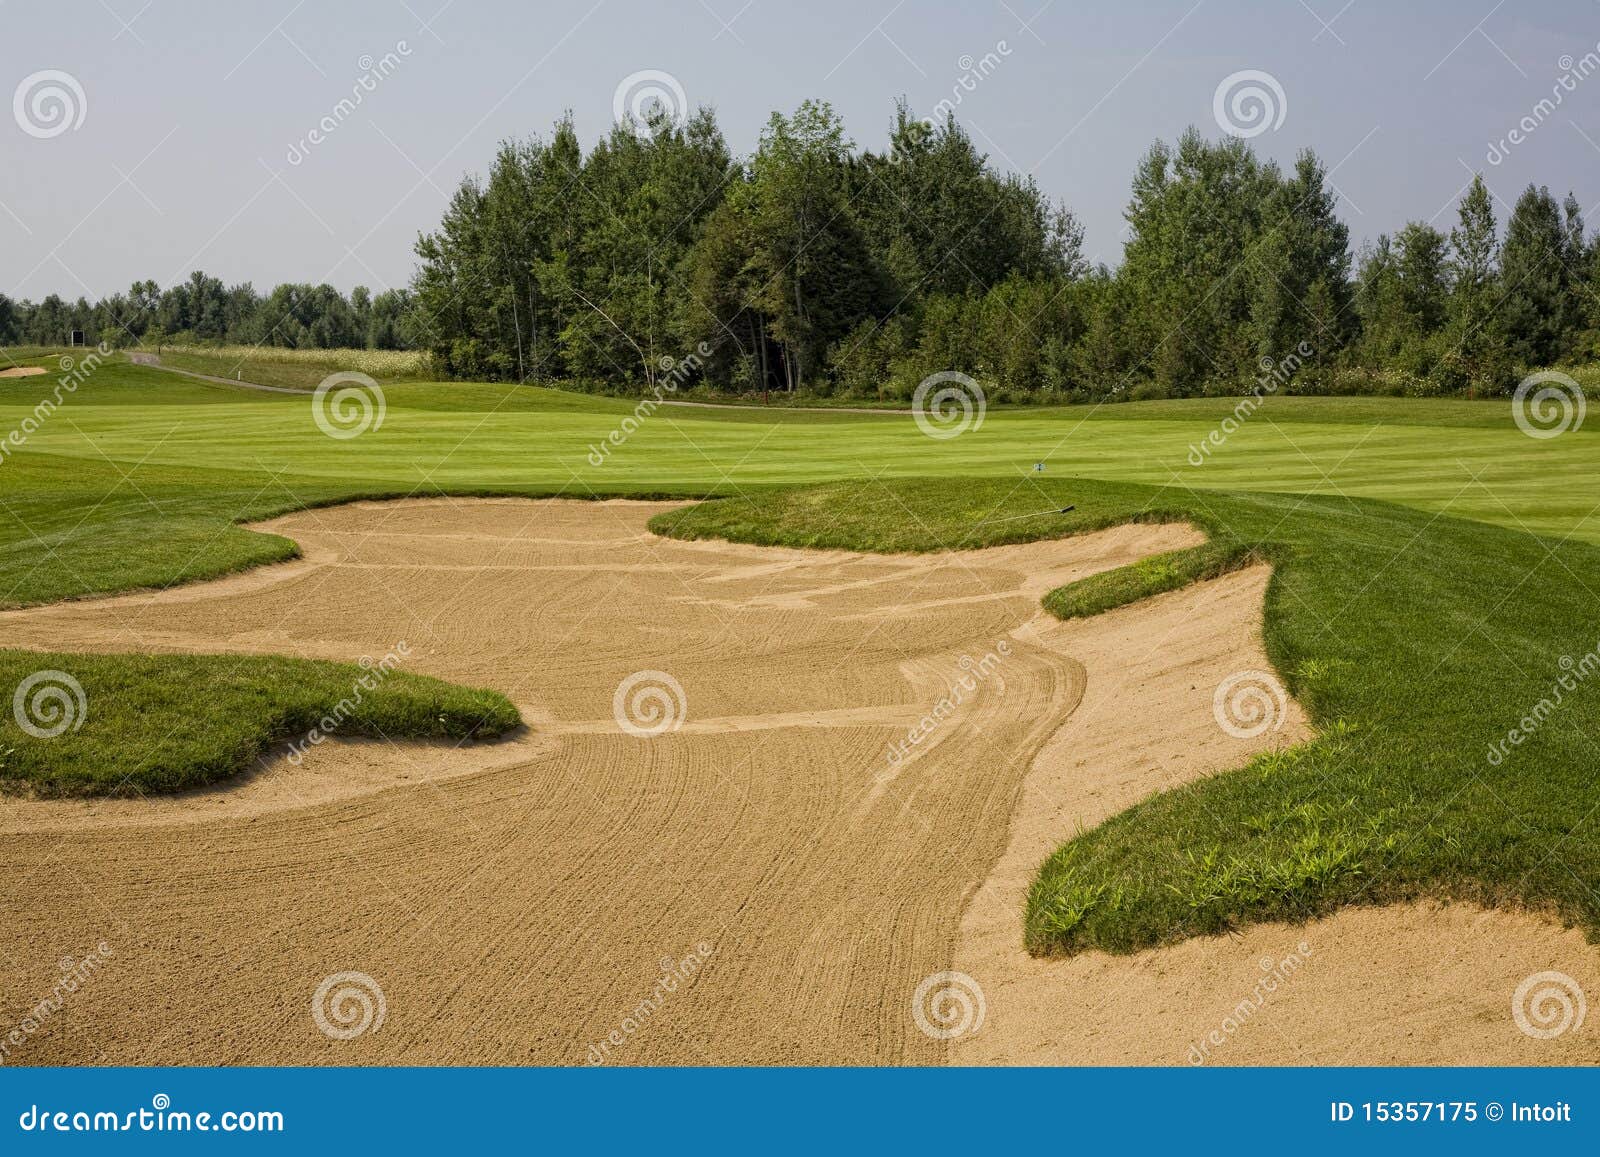 Sand Trap and Greens. Beautifully maintained golf greens with raked sand trap.